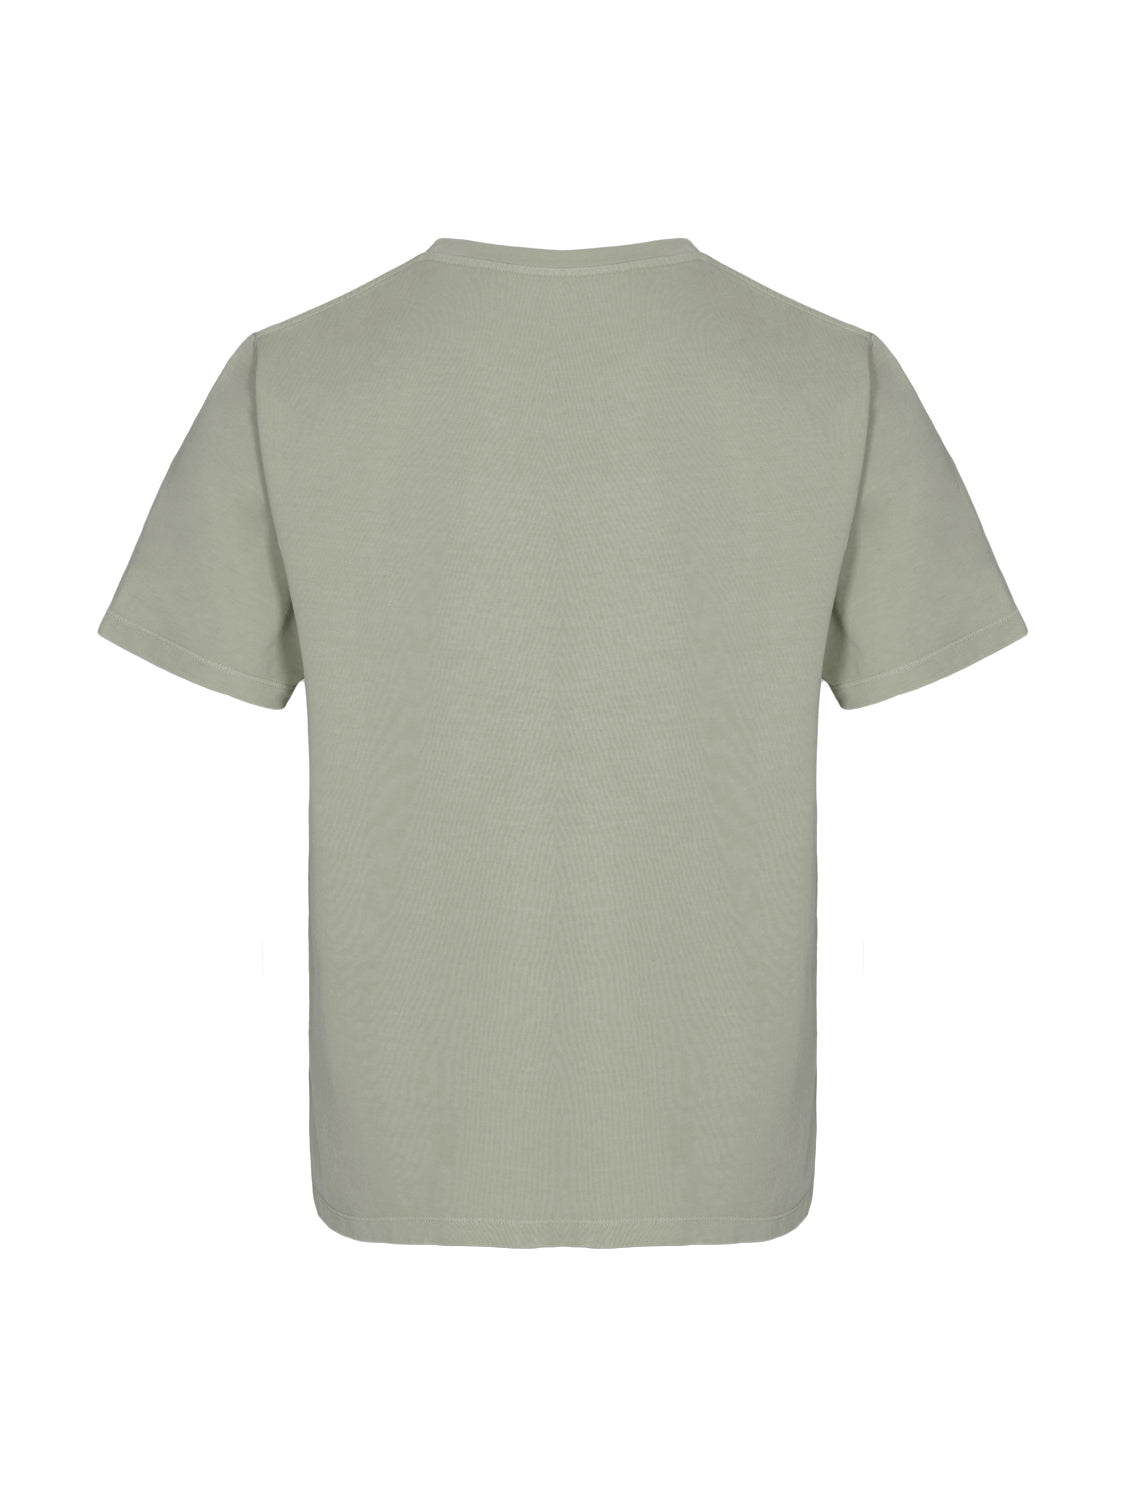 Relaxed fit T-Shirt